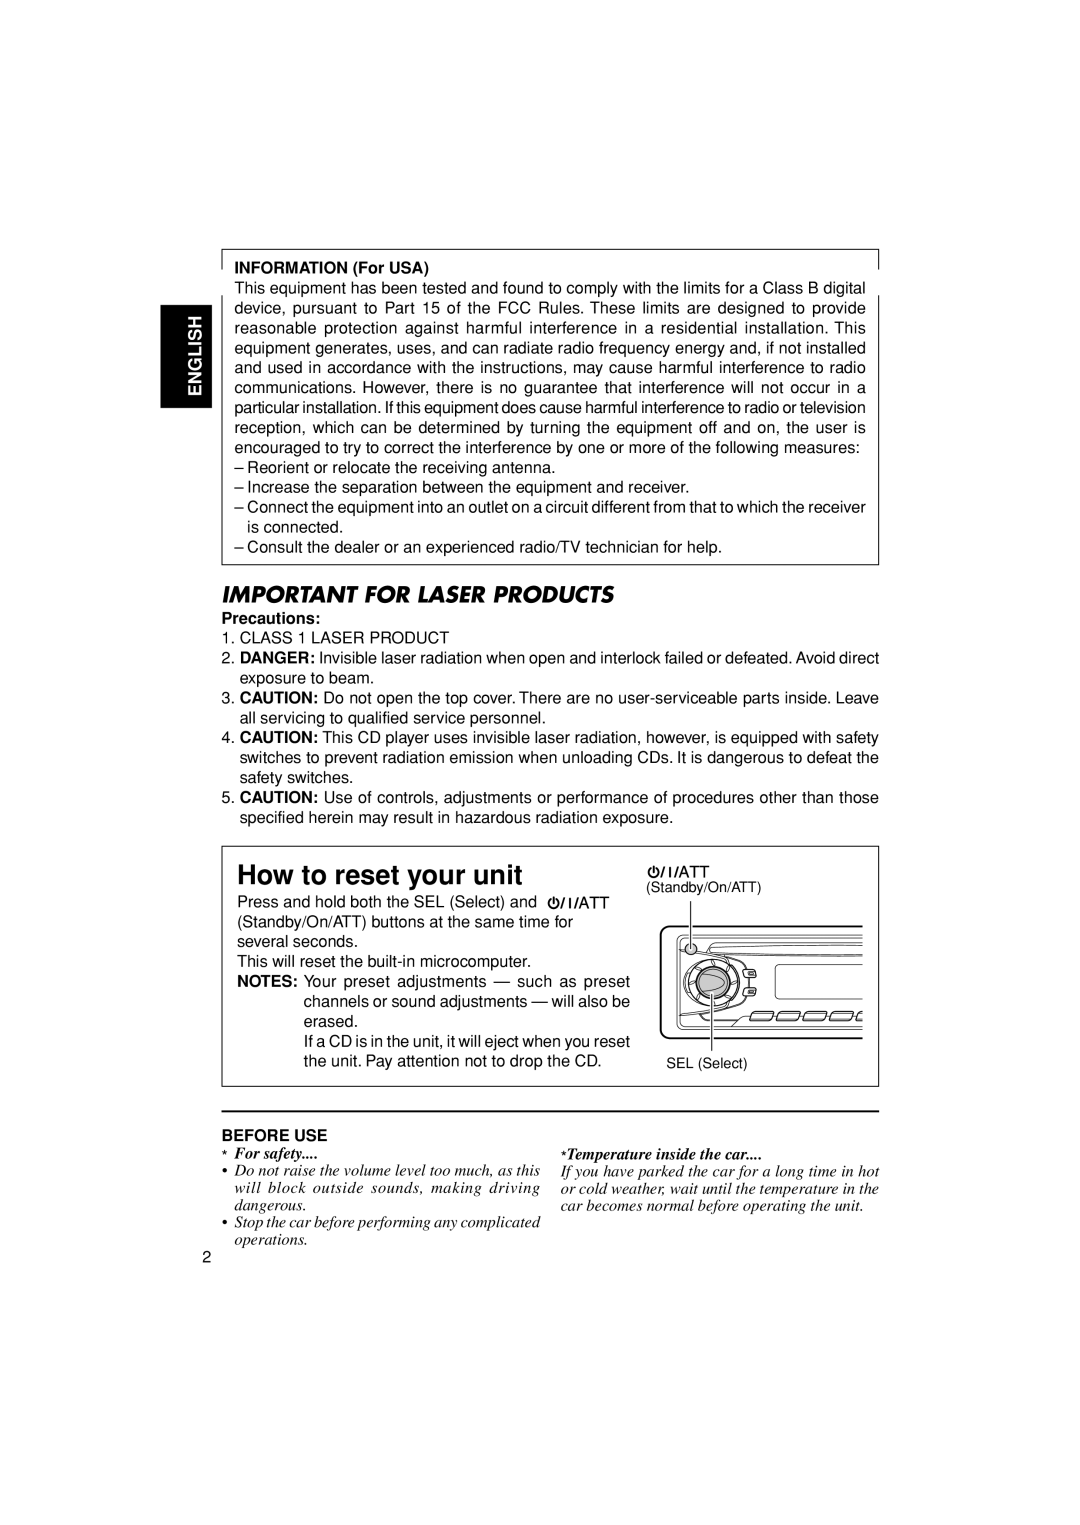 JVC KD-S670 manual How to reset your unit, Important For Laser Products, English, For safety, Temperature inside the car 